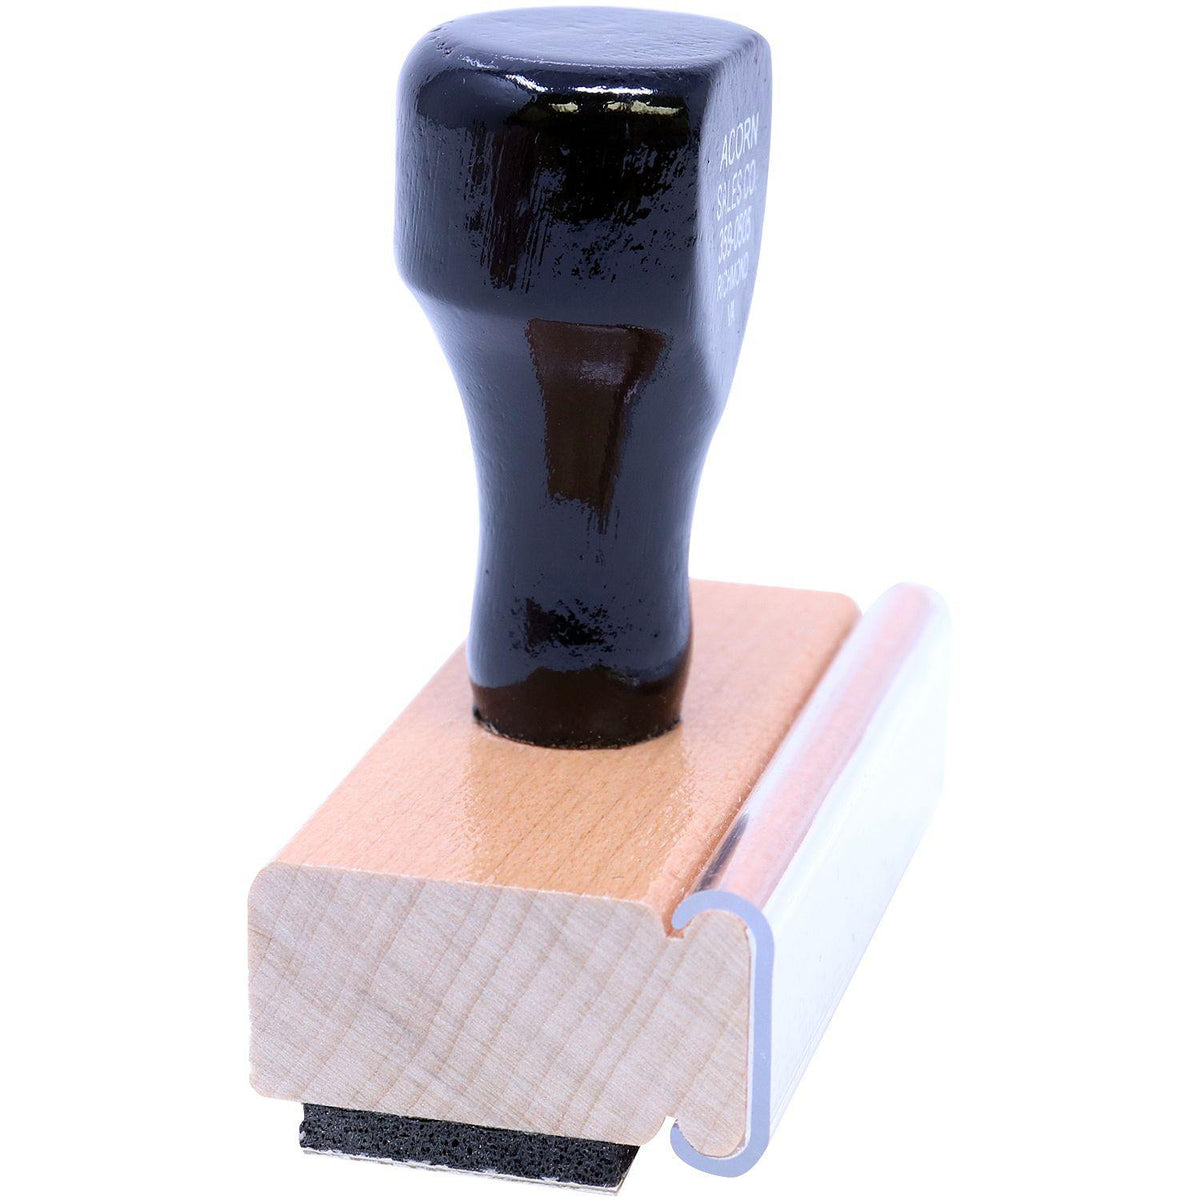 Side View of Credit Outline Rubber Stamp at an Angle